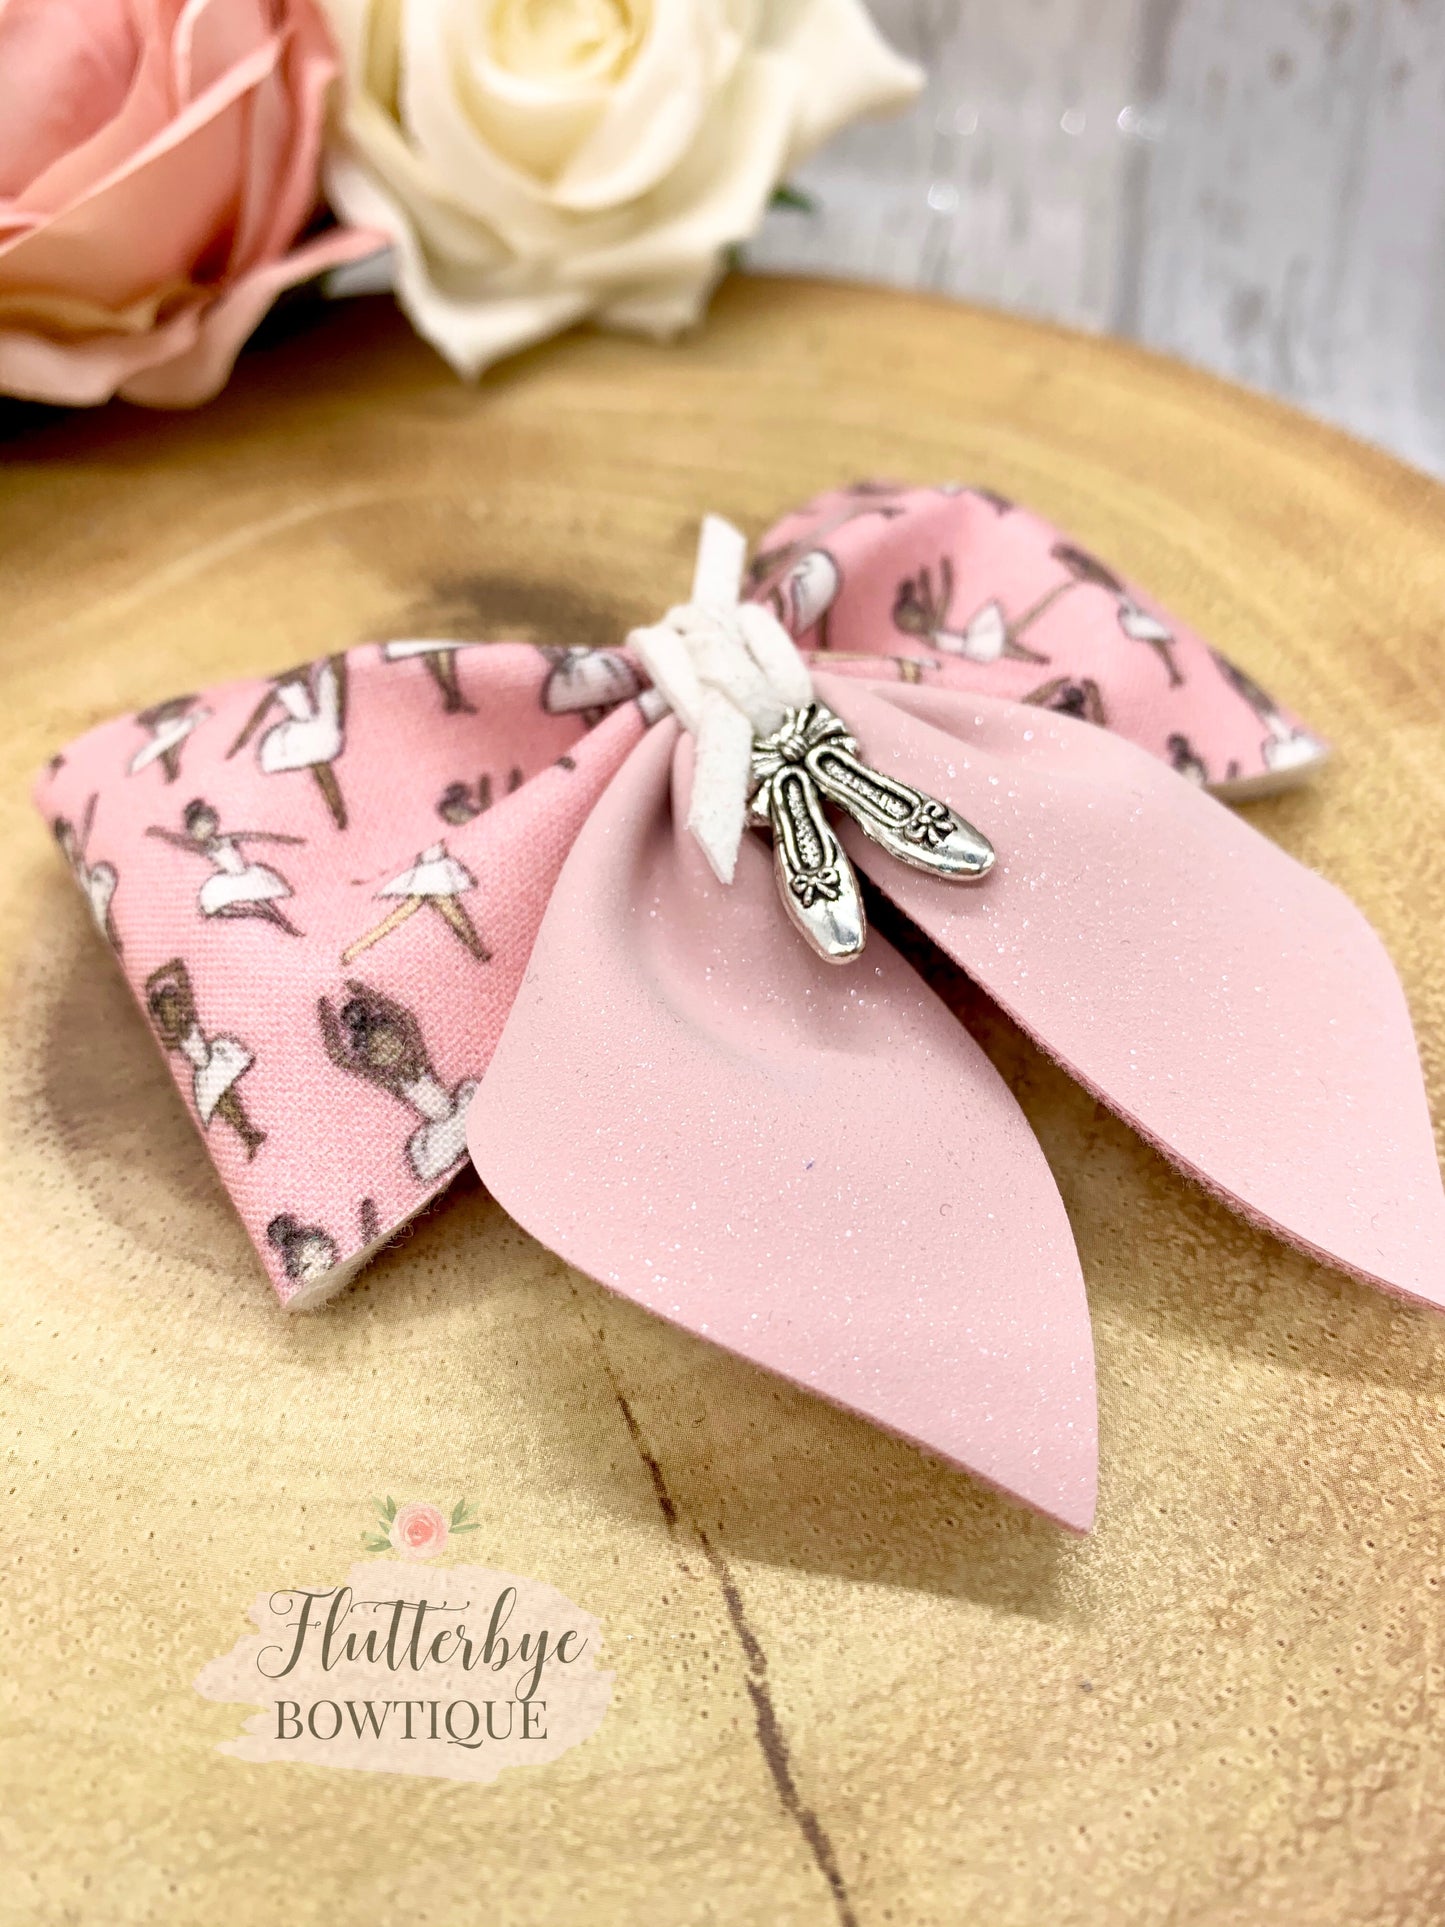 Ballerina Party Pinch Hair Bow, ballet shoes charm Hair Bow - Flutterbye Bowtique